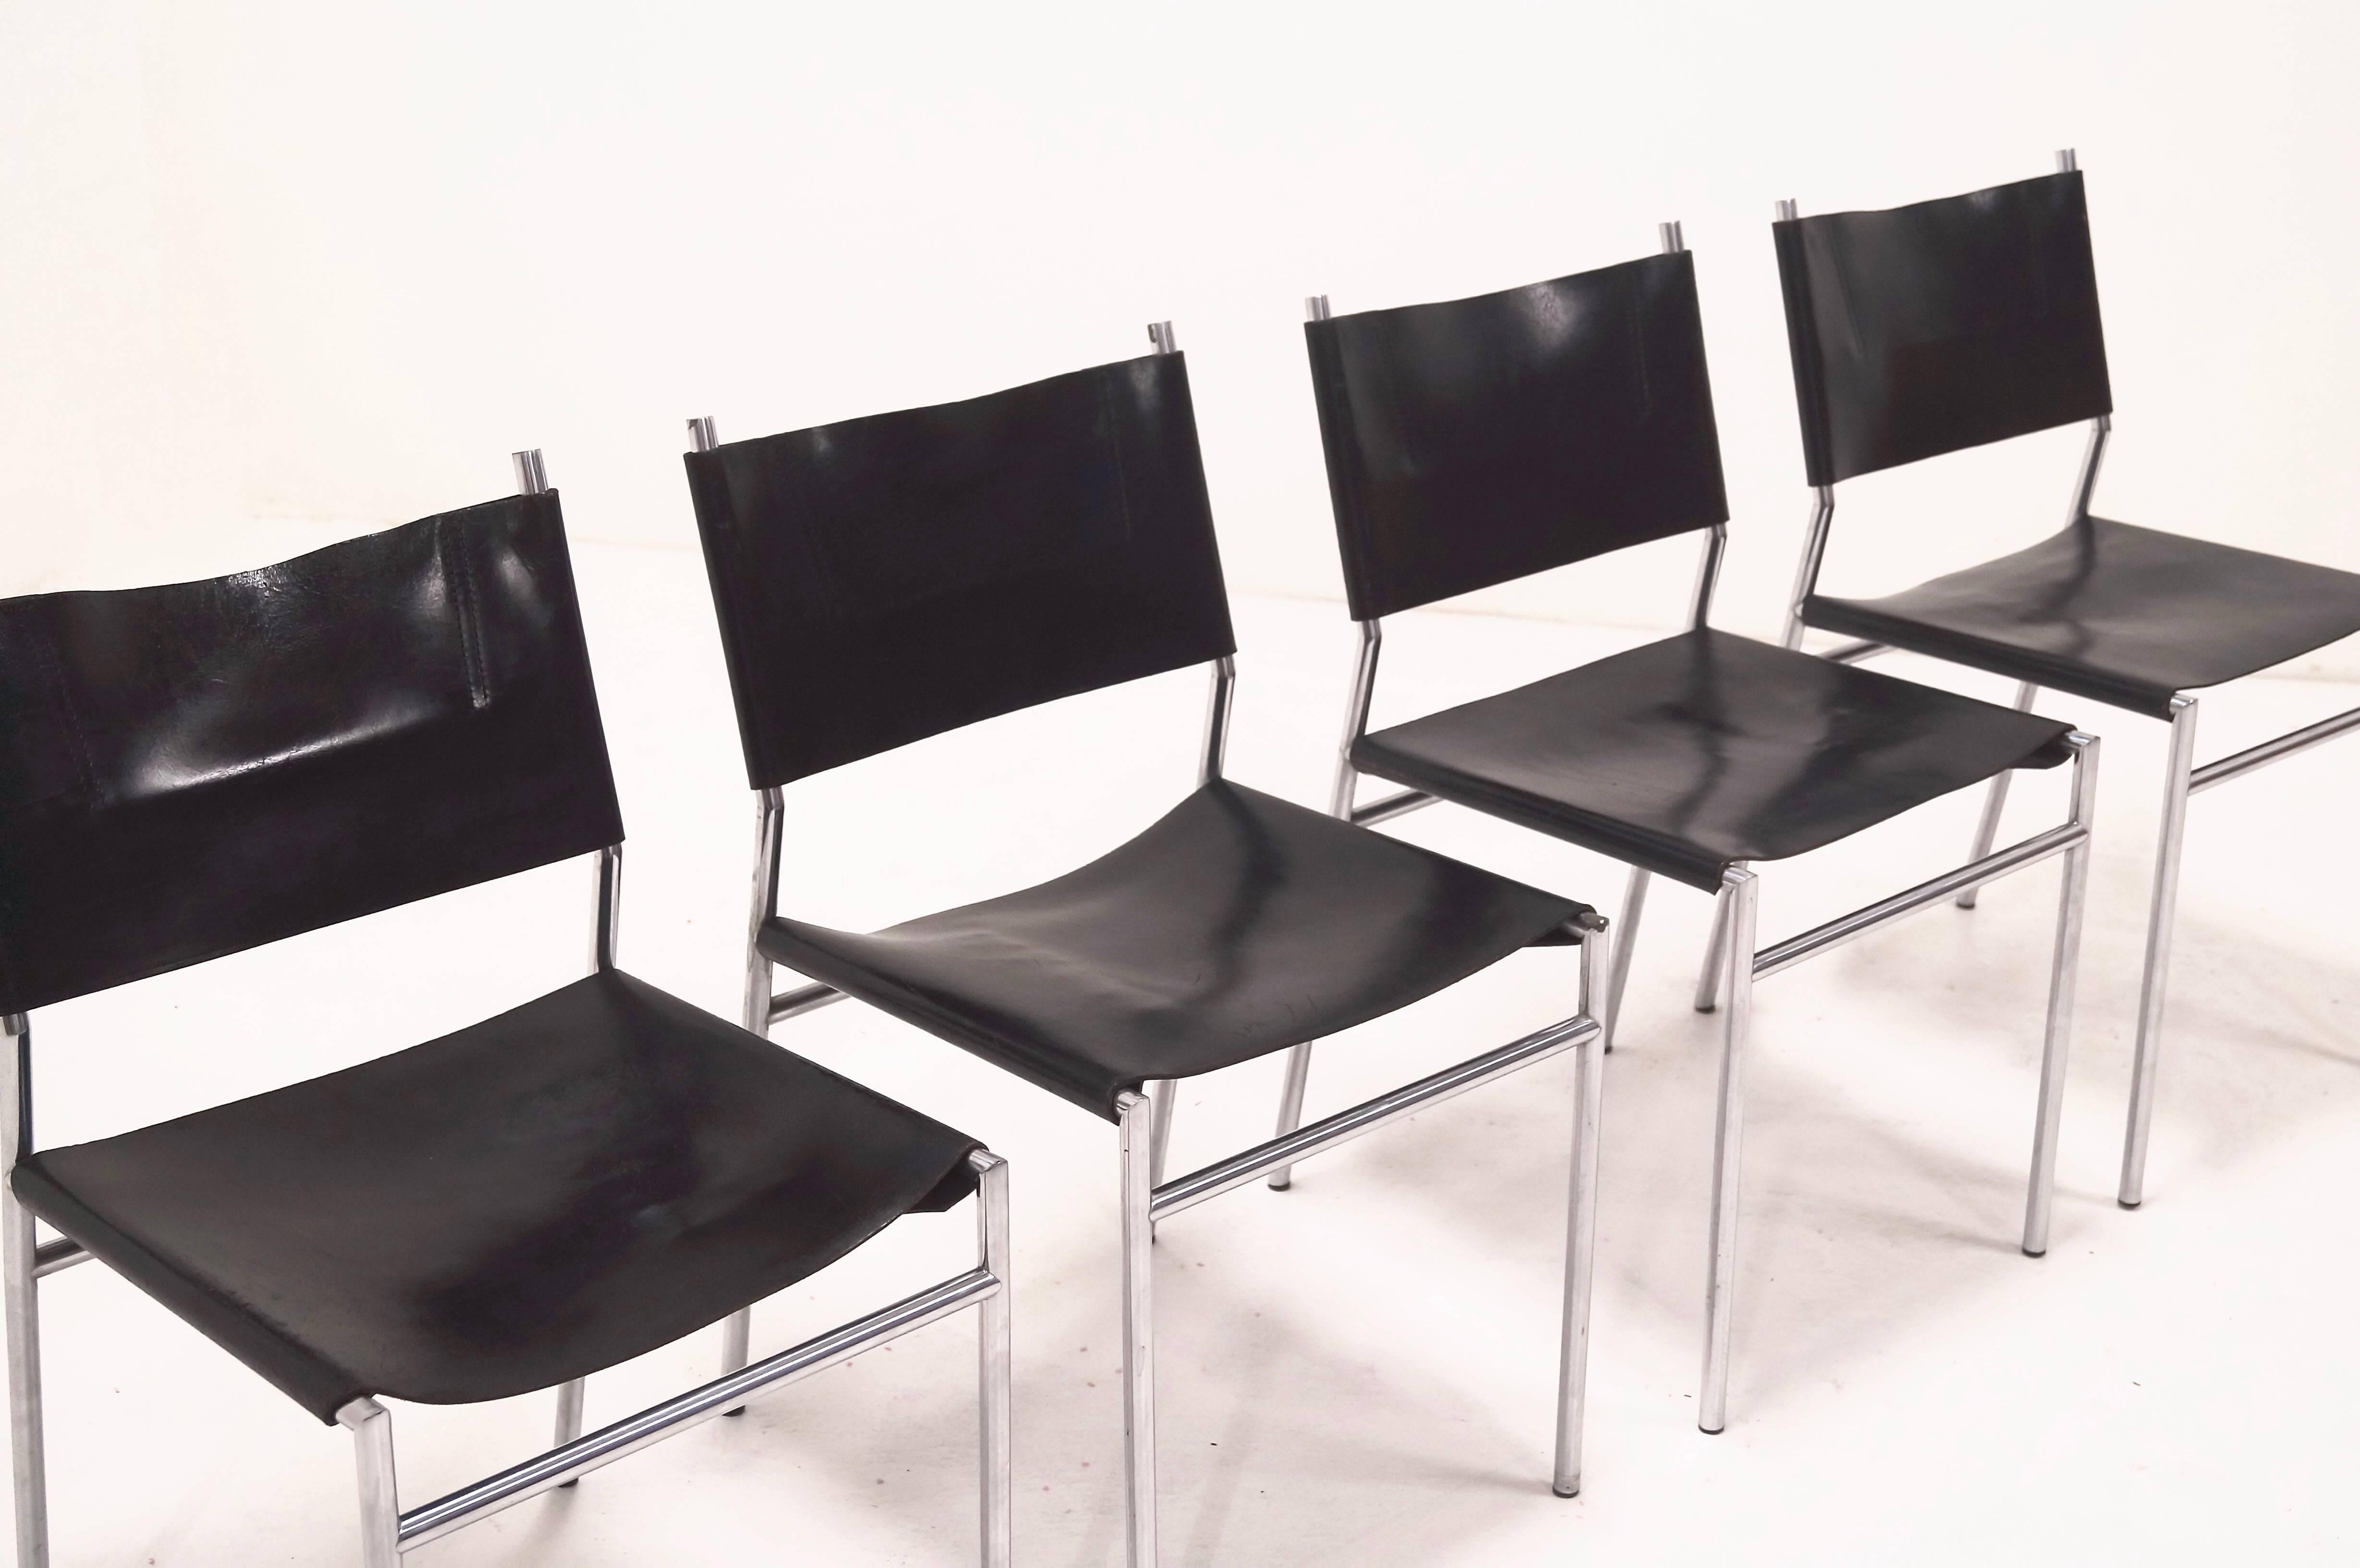 Dutch Set of Four Martin Visser Dining Chairs in Black Leather for 'T Spectrum, 1960s For Sale